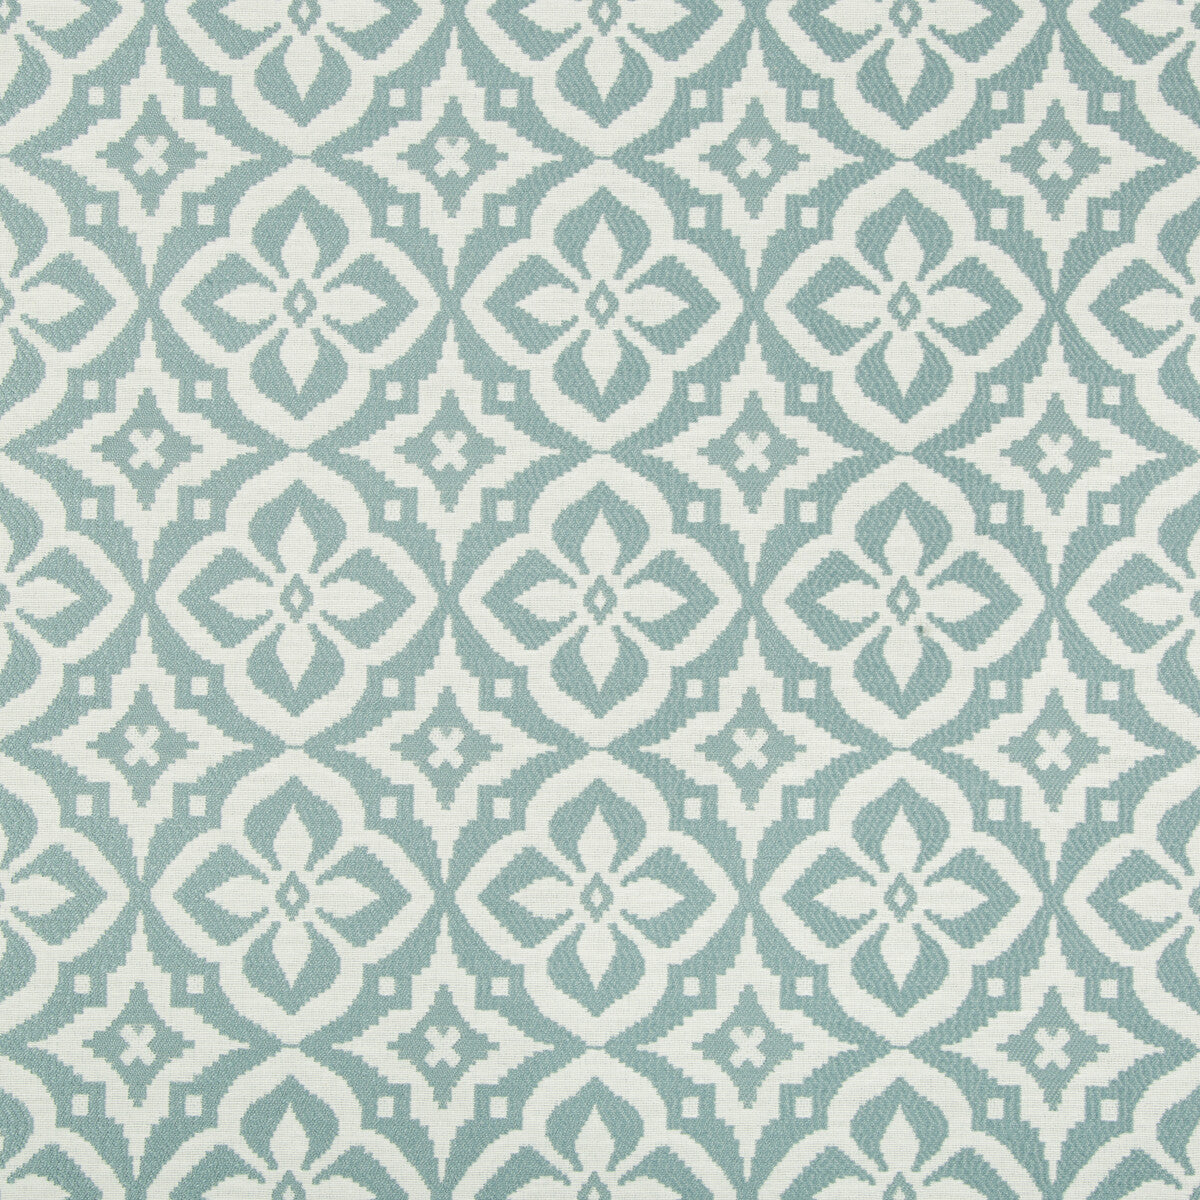 Kravet Contract fabric in 34757-15 color - pattern 34757.15.0 - by Kravet Contract in the Crypton Incase collection